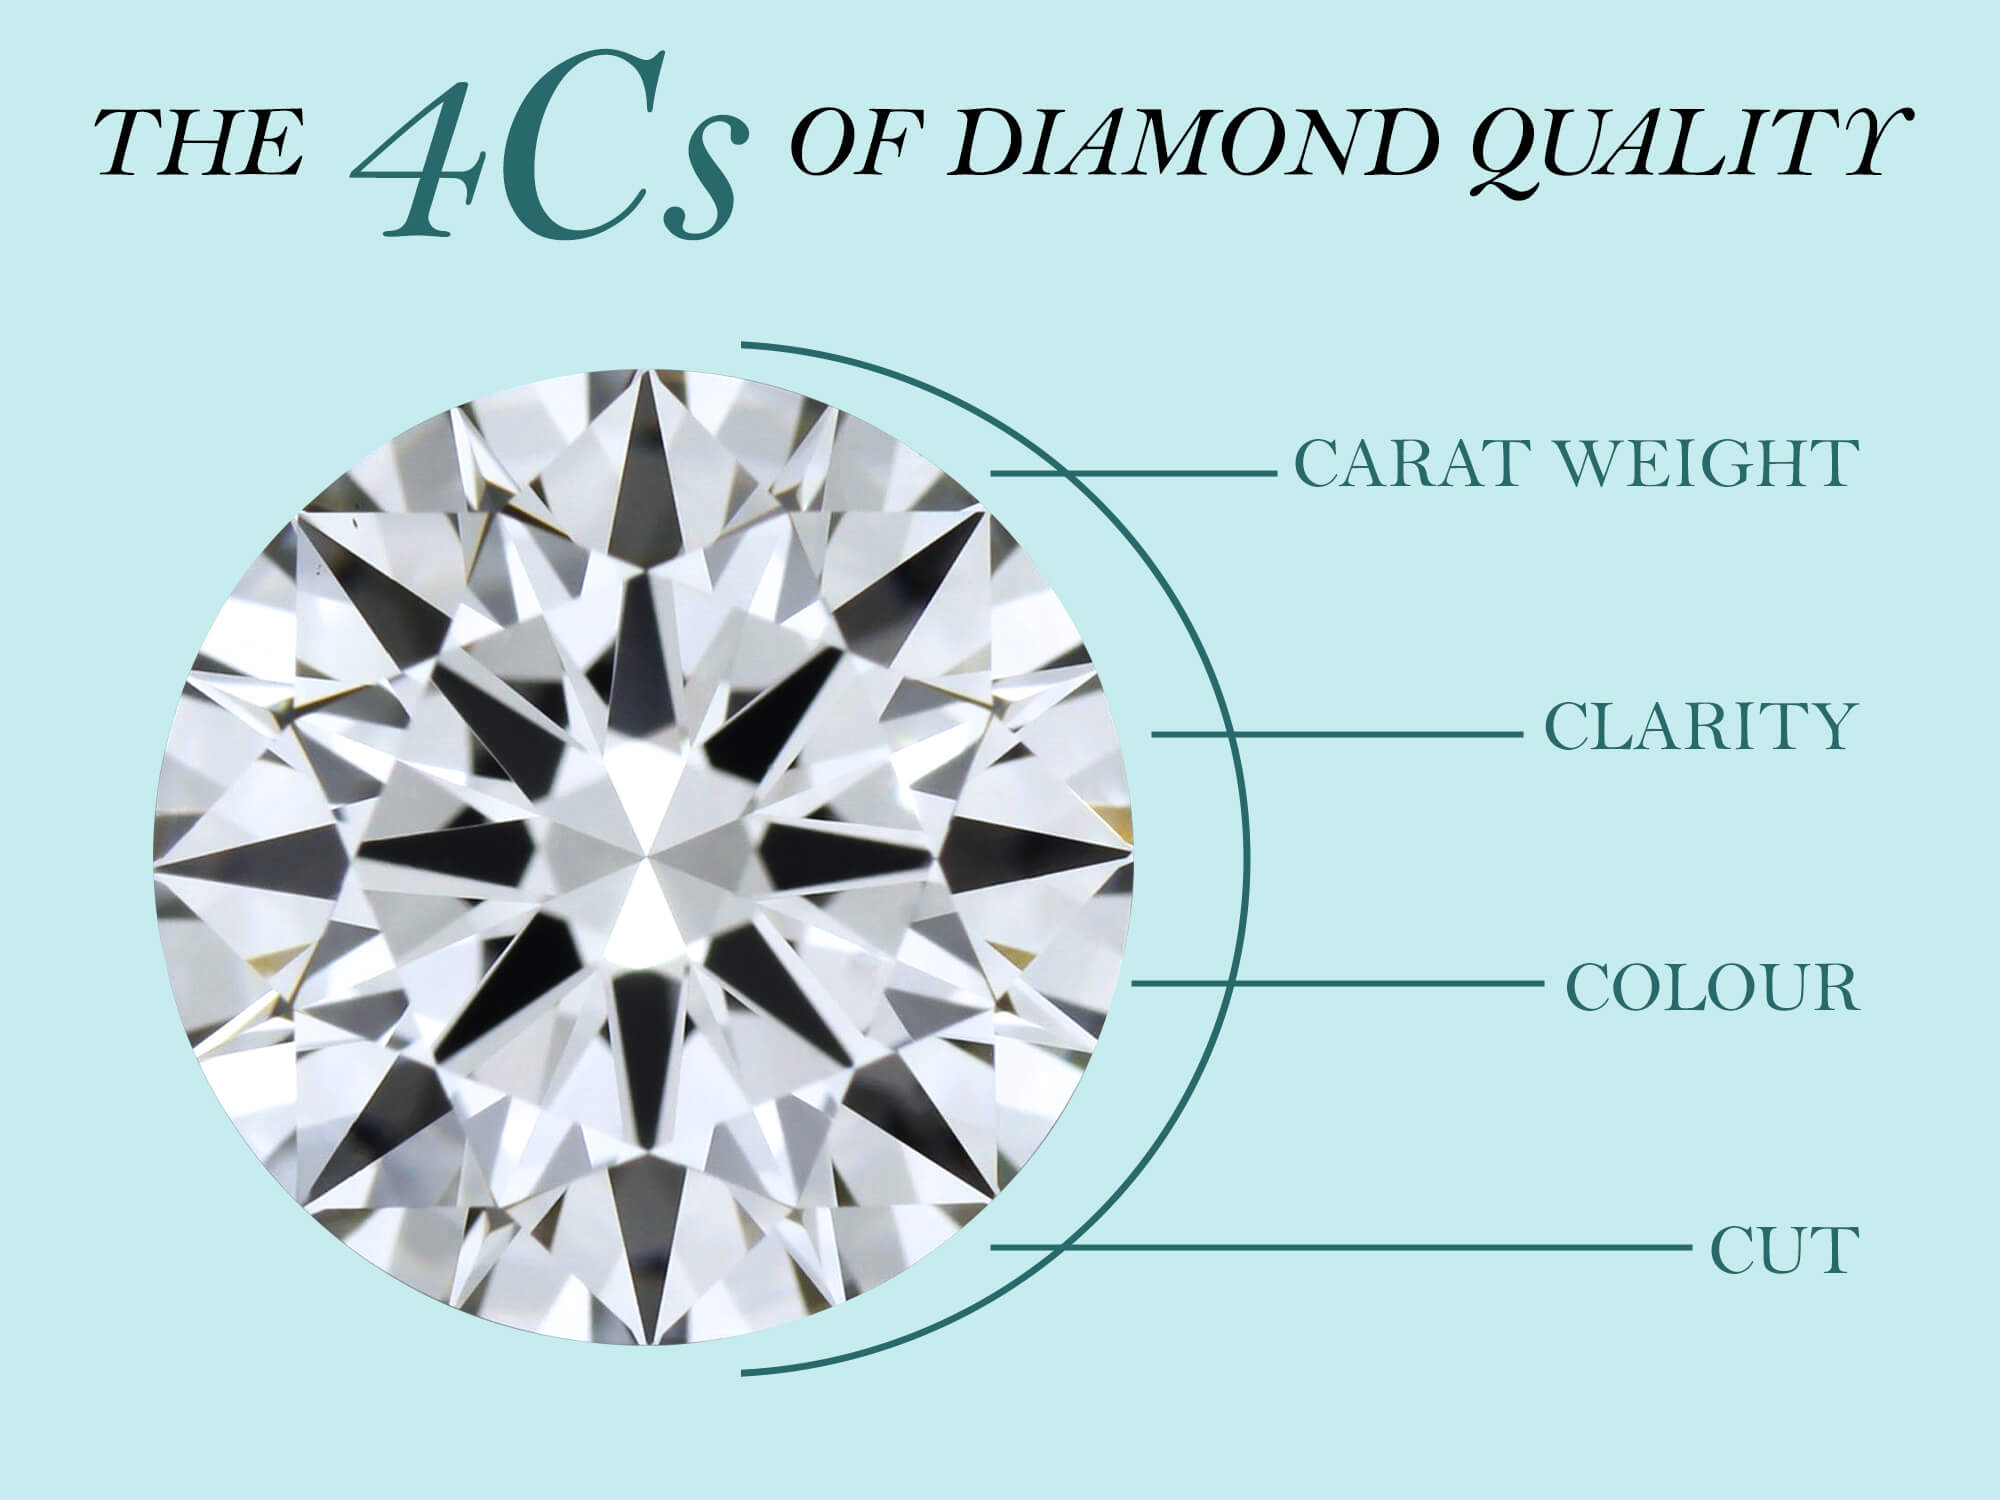 Why should one choose lab-grown diamonds